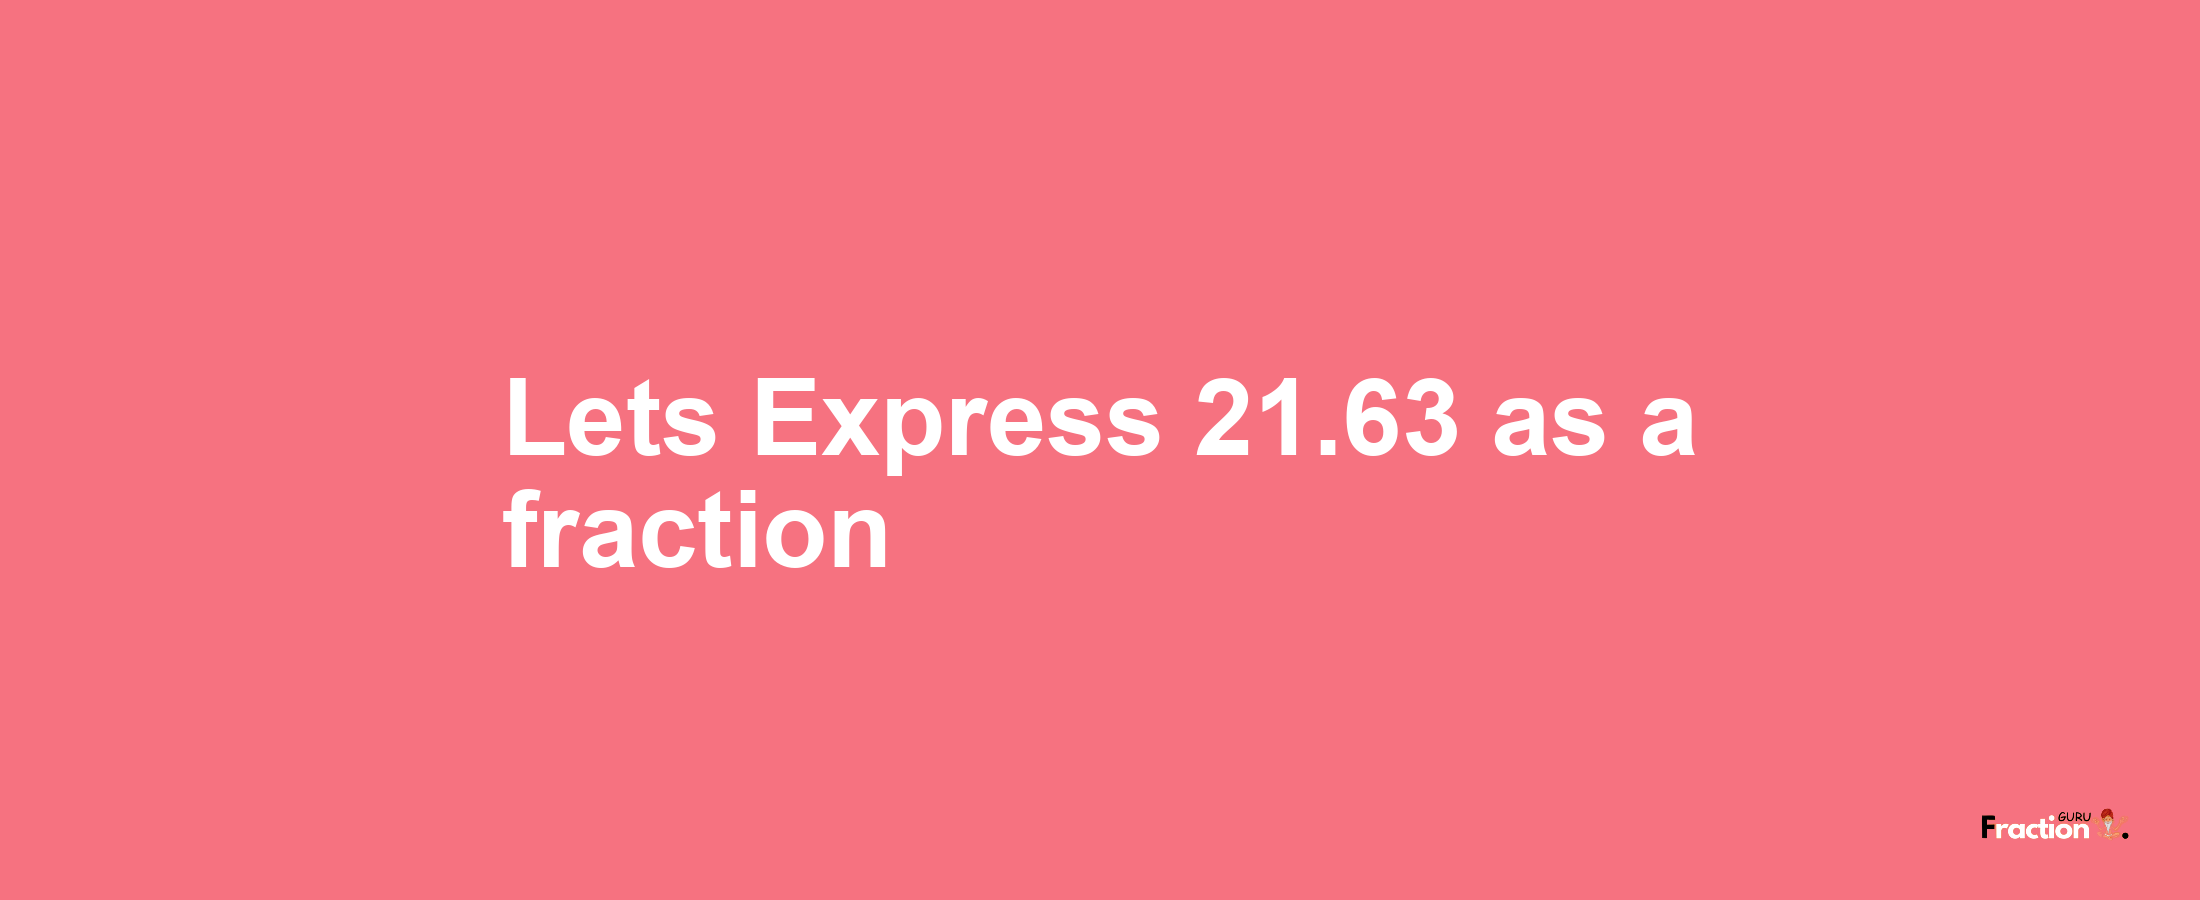 Lets Express 21.63 as afraction